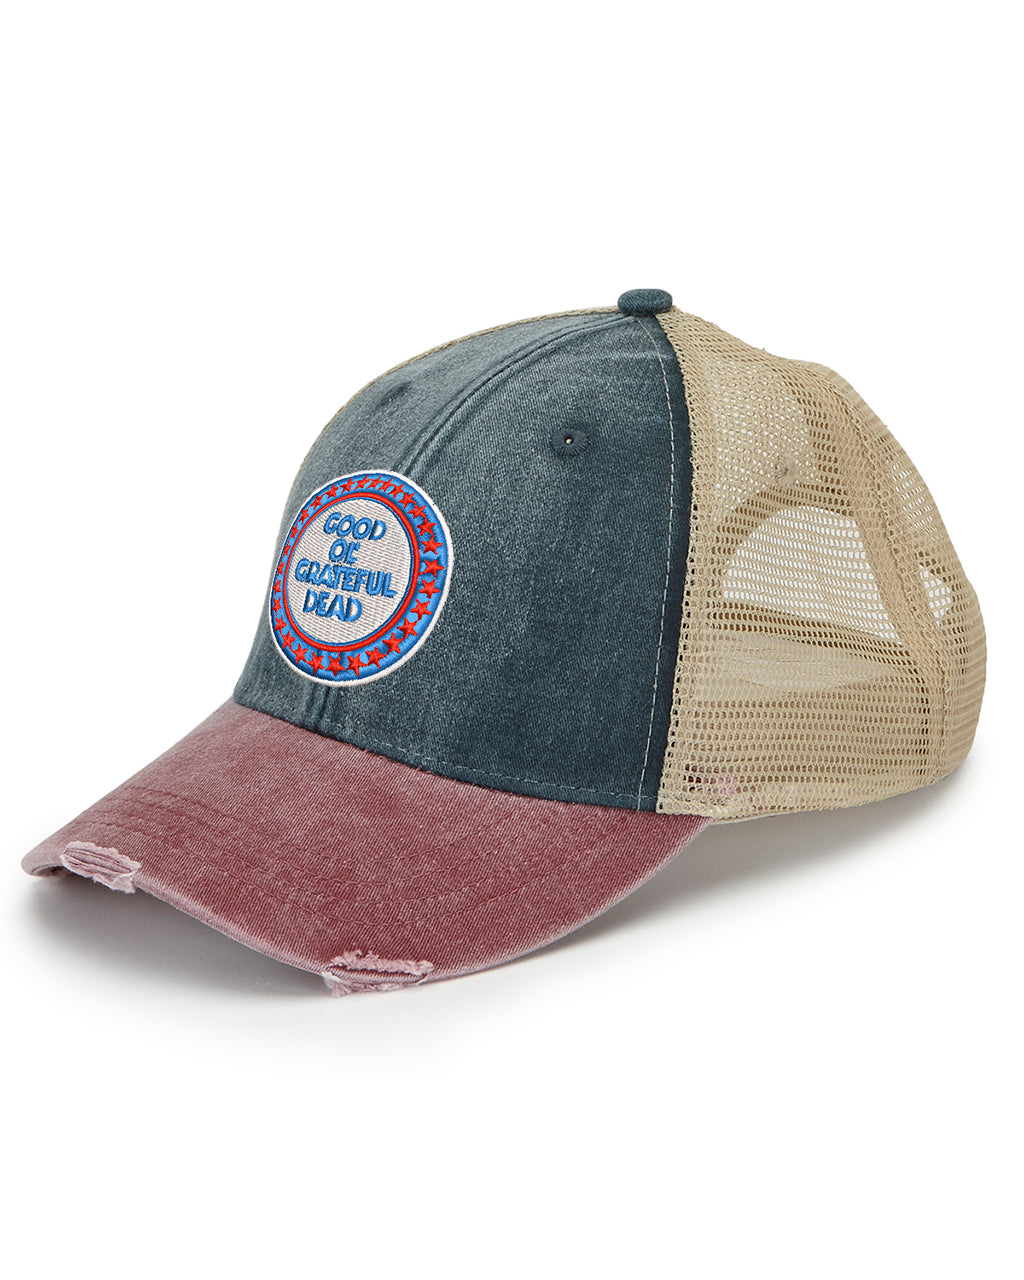 Good Ol' Grateful Dead Embroidered on Adams Ollie Cap! – Draw The Line  Apparel